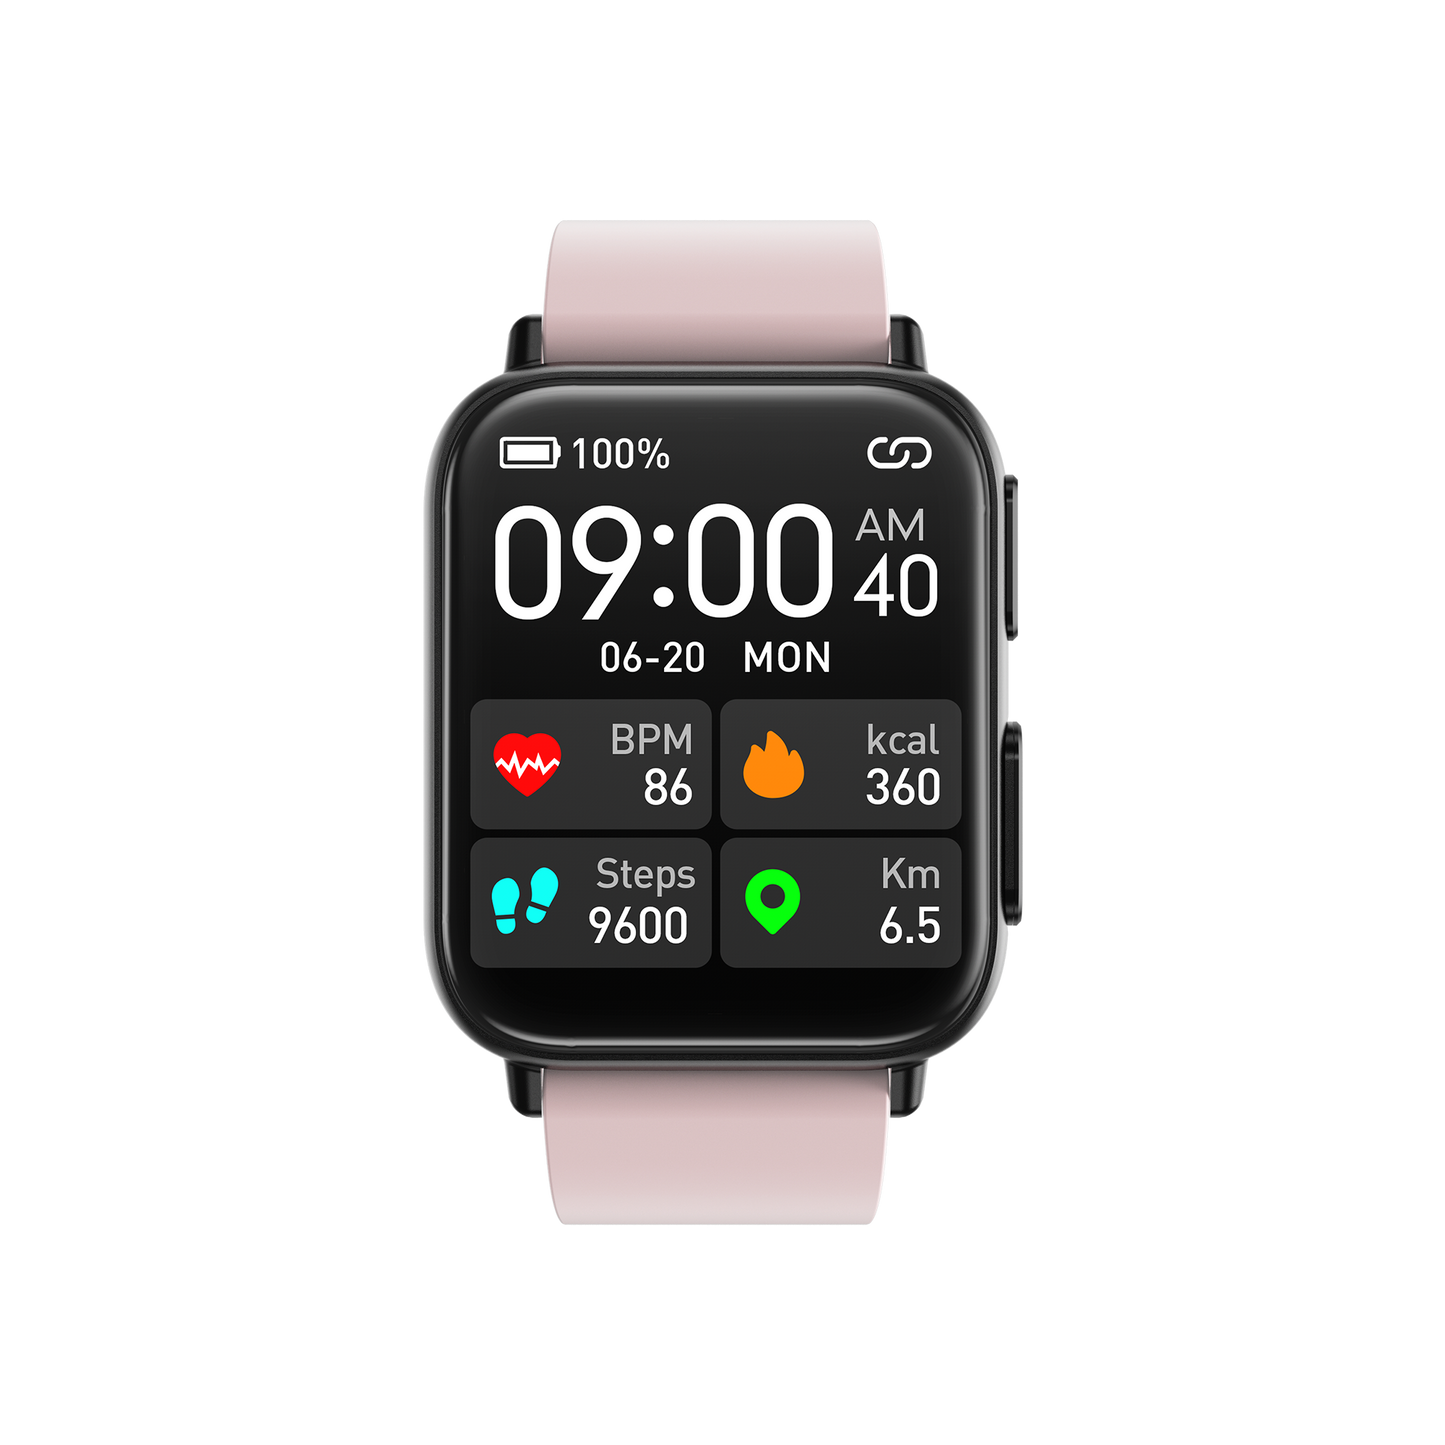 GT5 Pro New Advanced Health Monitoring Smartwatch with Blood Sugar + Blood Pressure + ECG + Sleep Tracking